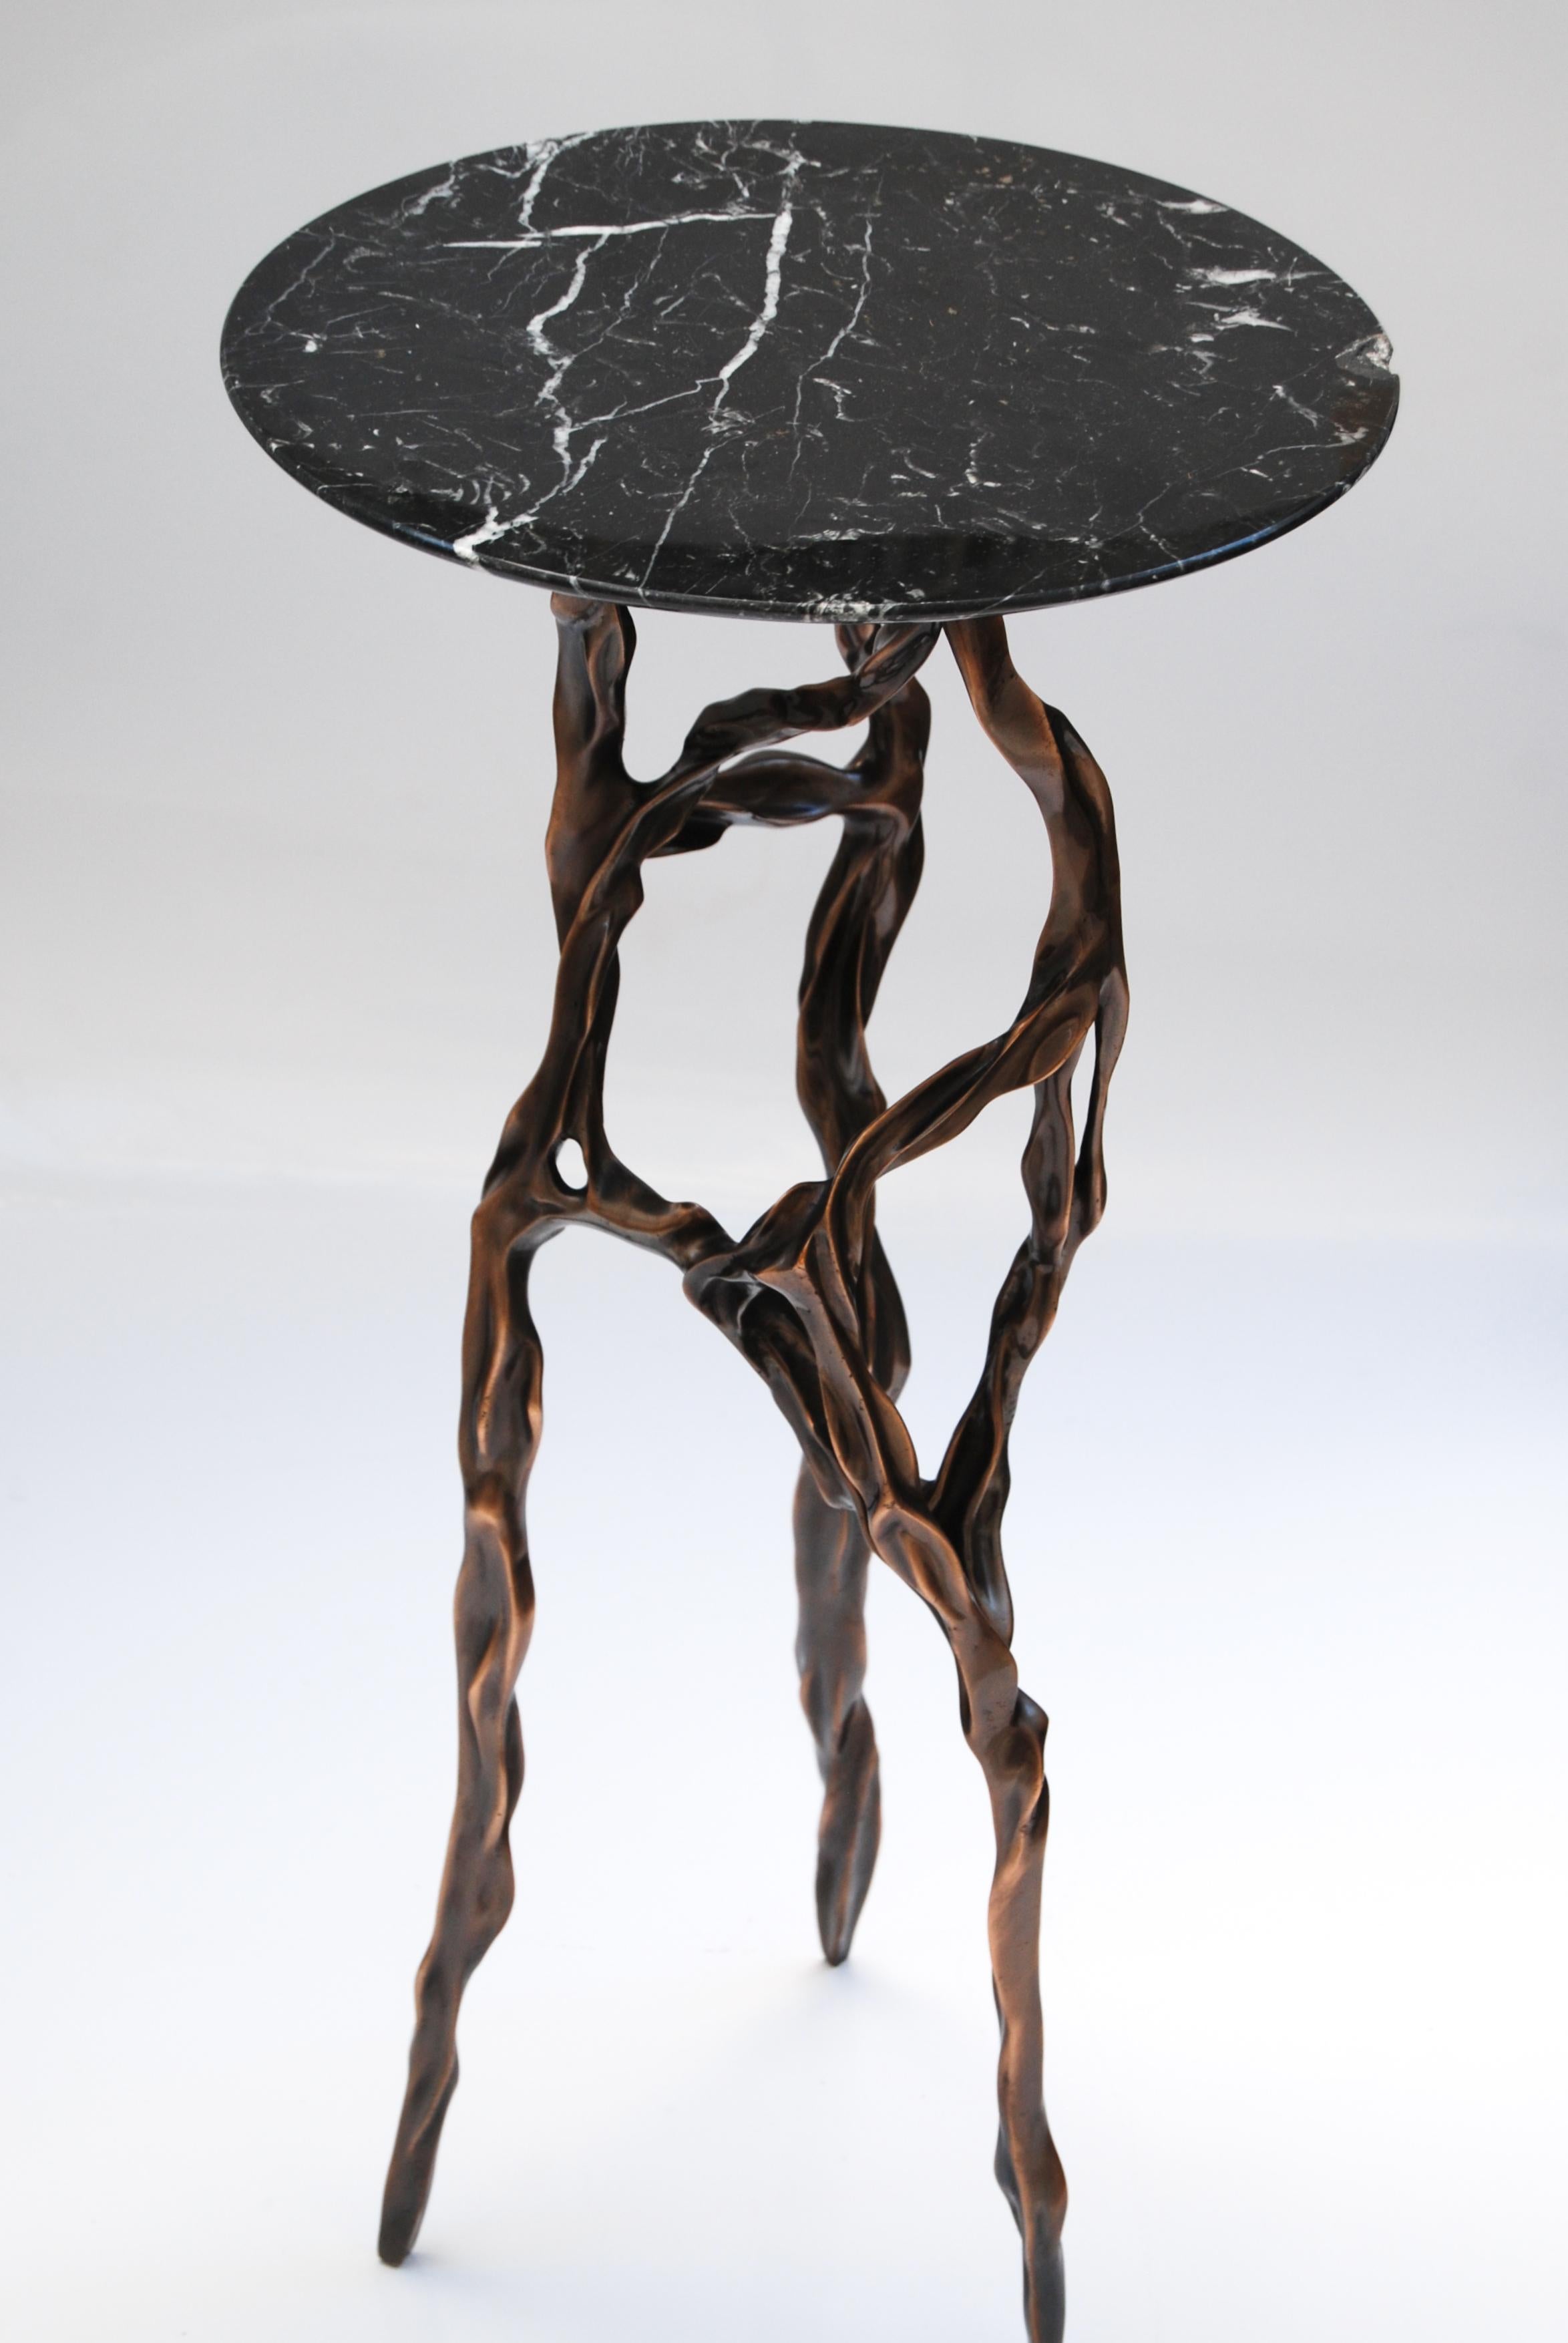 Contemporary Polished Bronze Side Table with Marquina Marble Top by Fakasaka Design